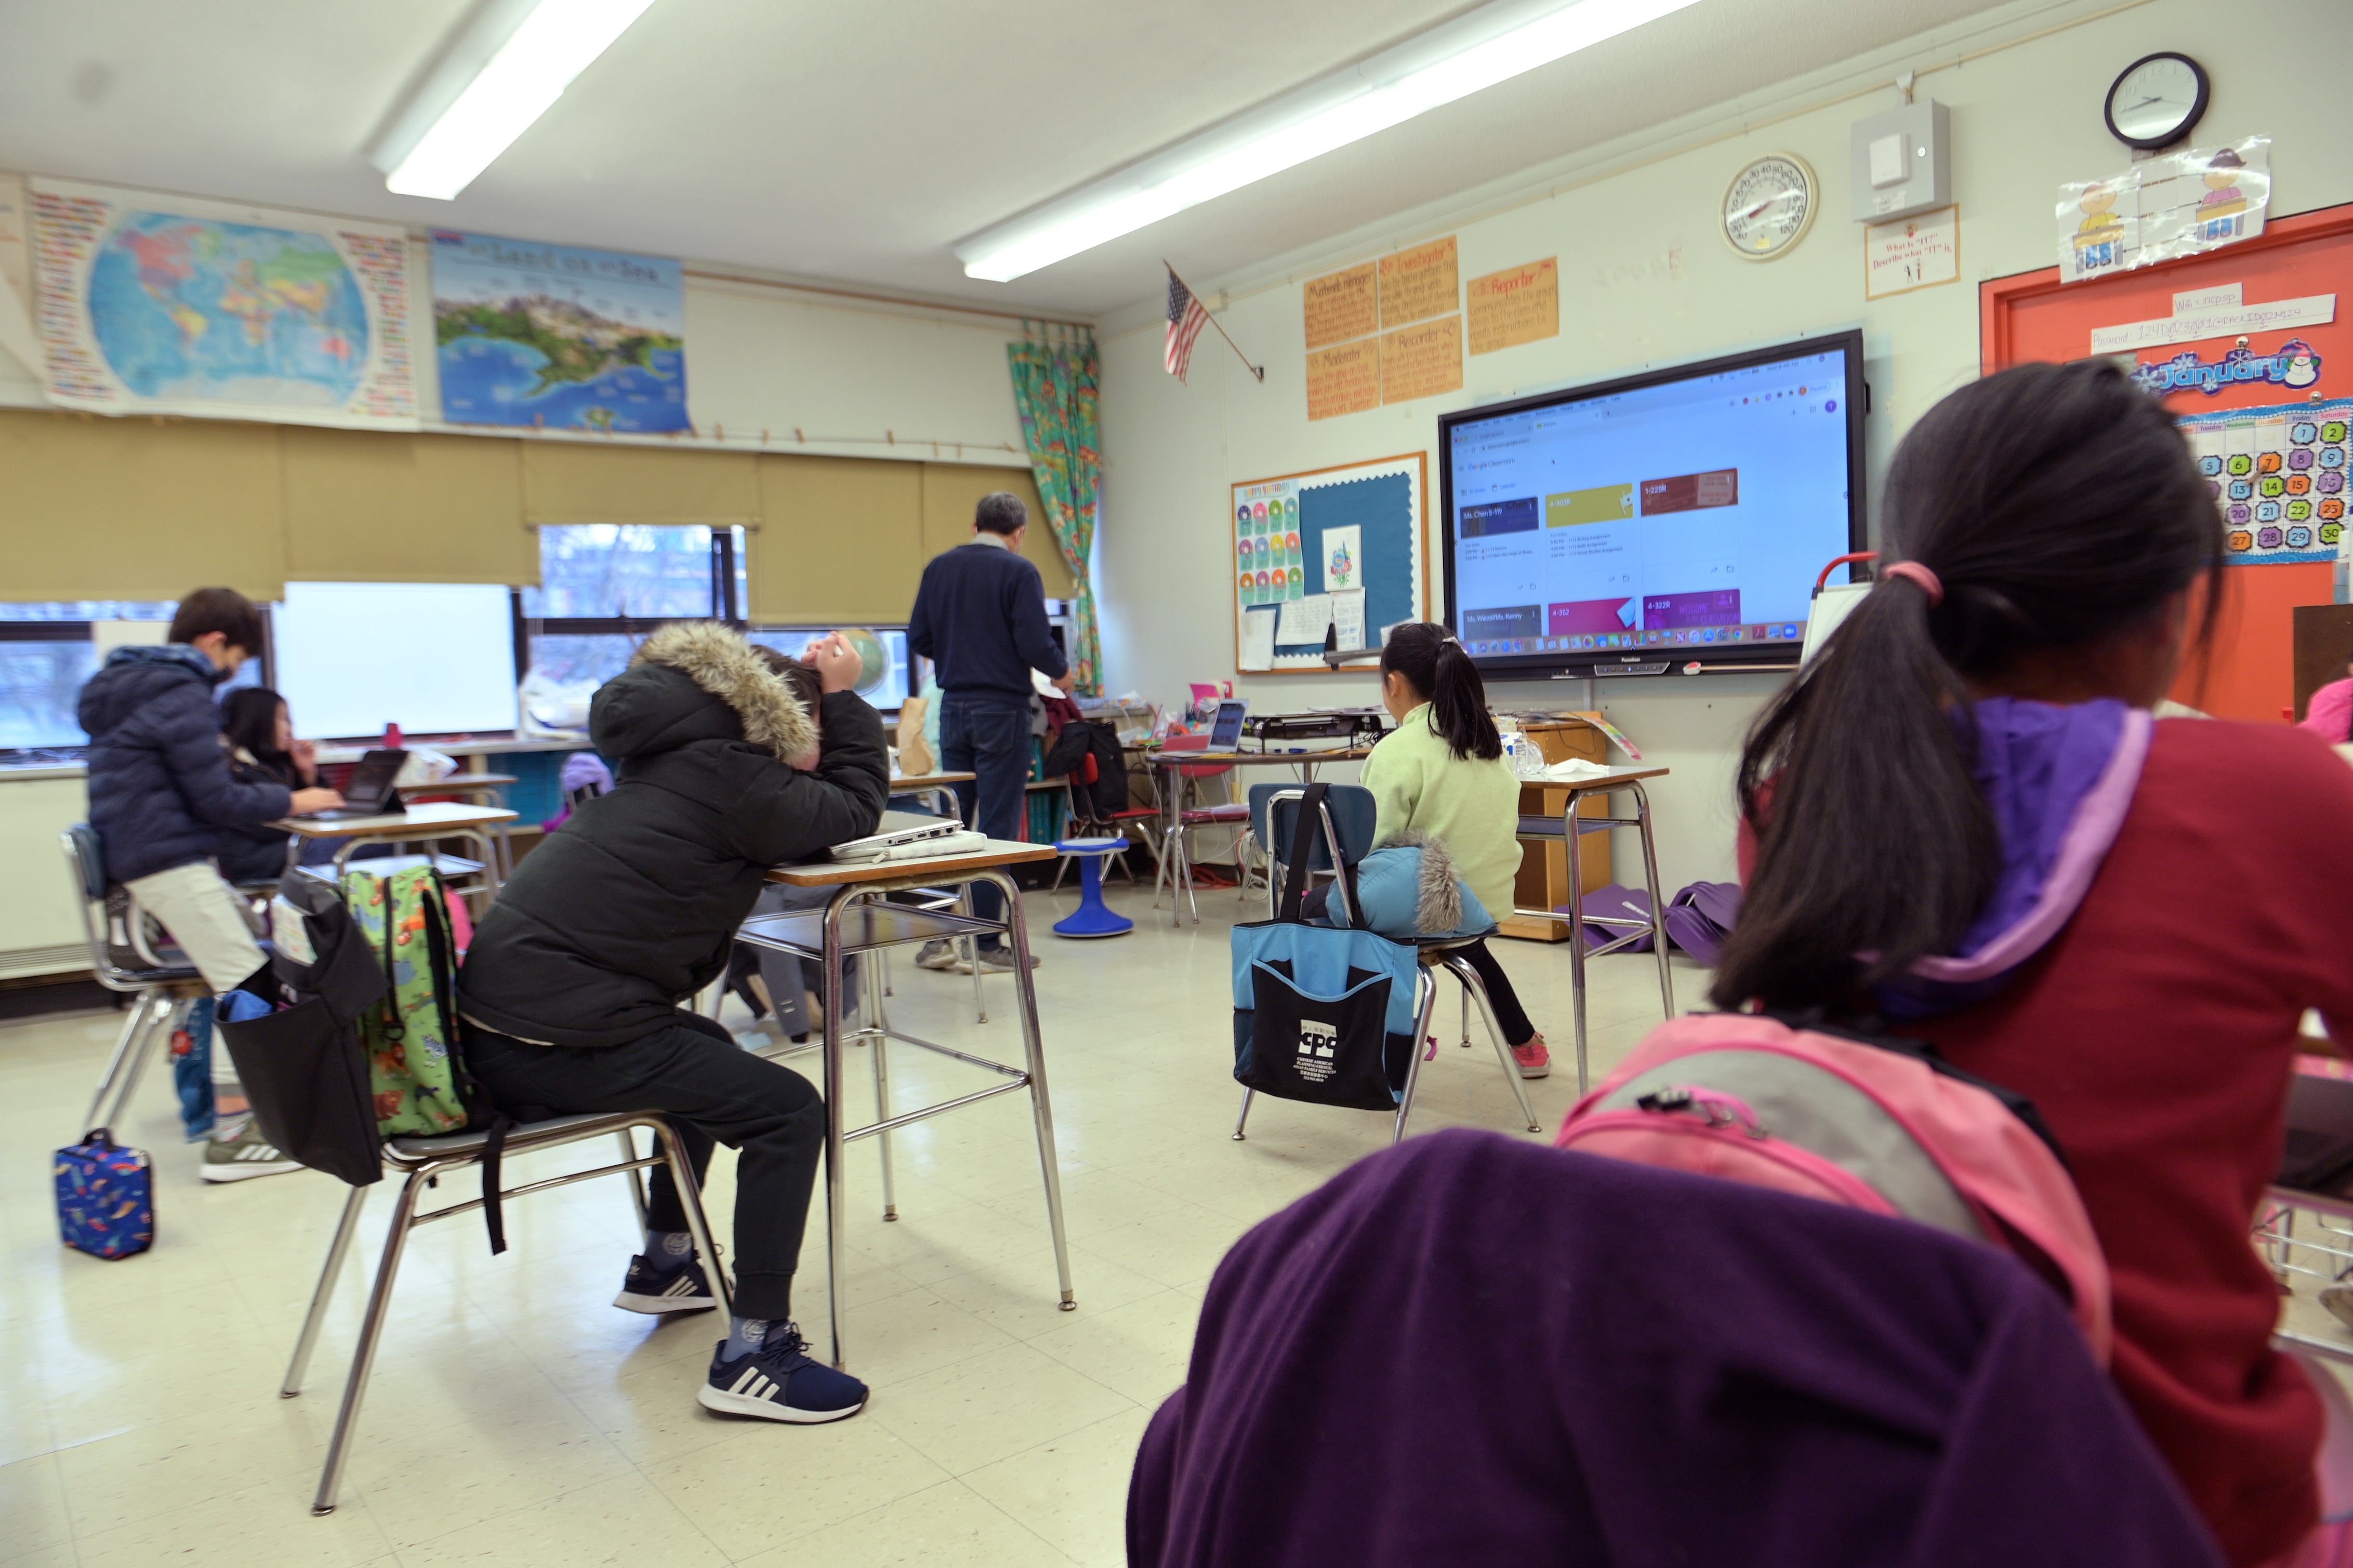 New York City Public Schools Continue To Adapt Learning Environments During COVID-19 Pandemic